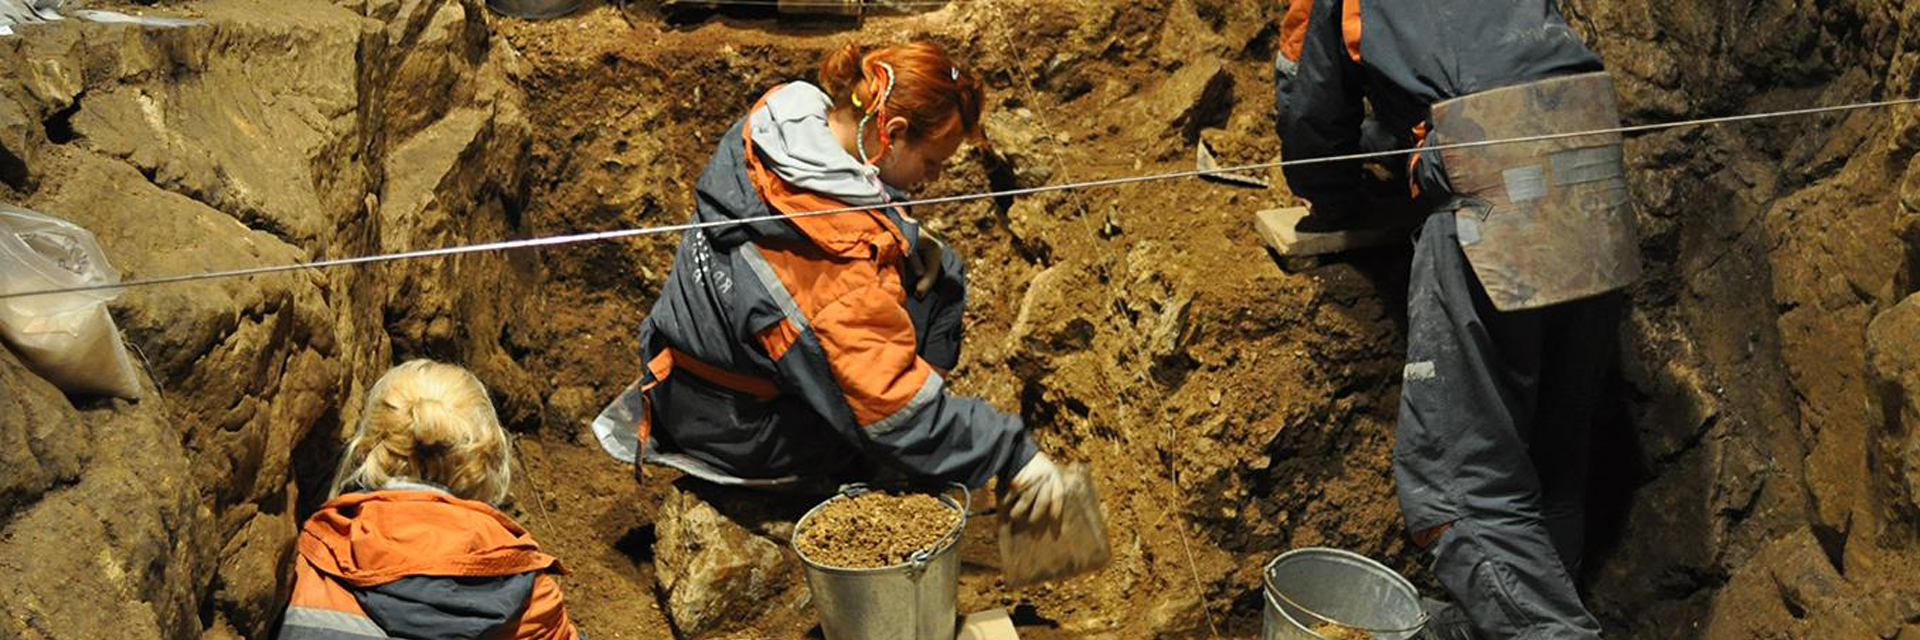 DOWN TO EARTH: Excavation of Denisova Cave, a site overseen by the Russian Academy of Sciences, is an ongoing venture involving international teams of researchers.